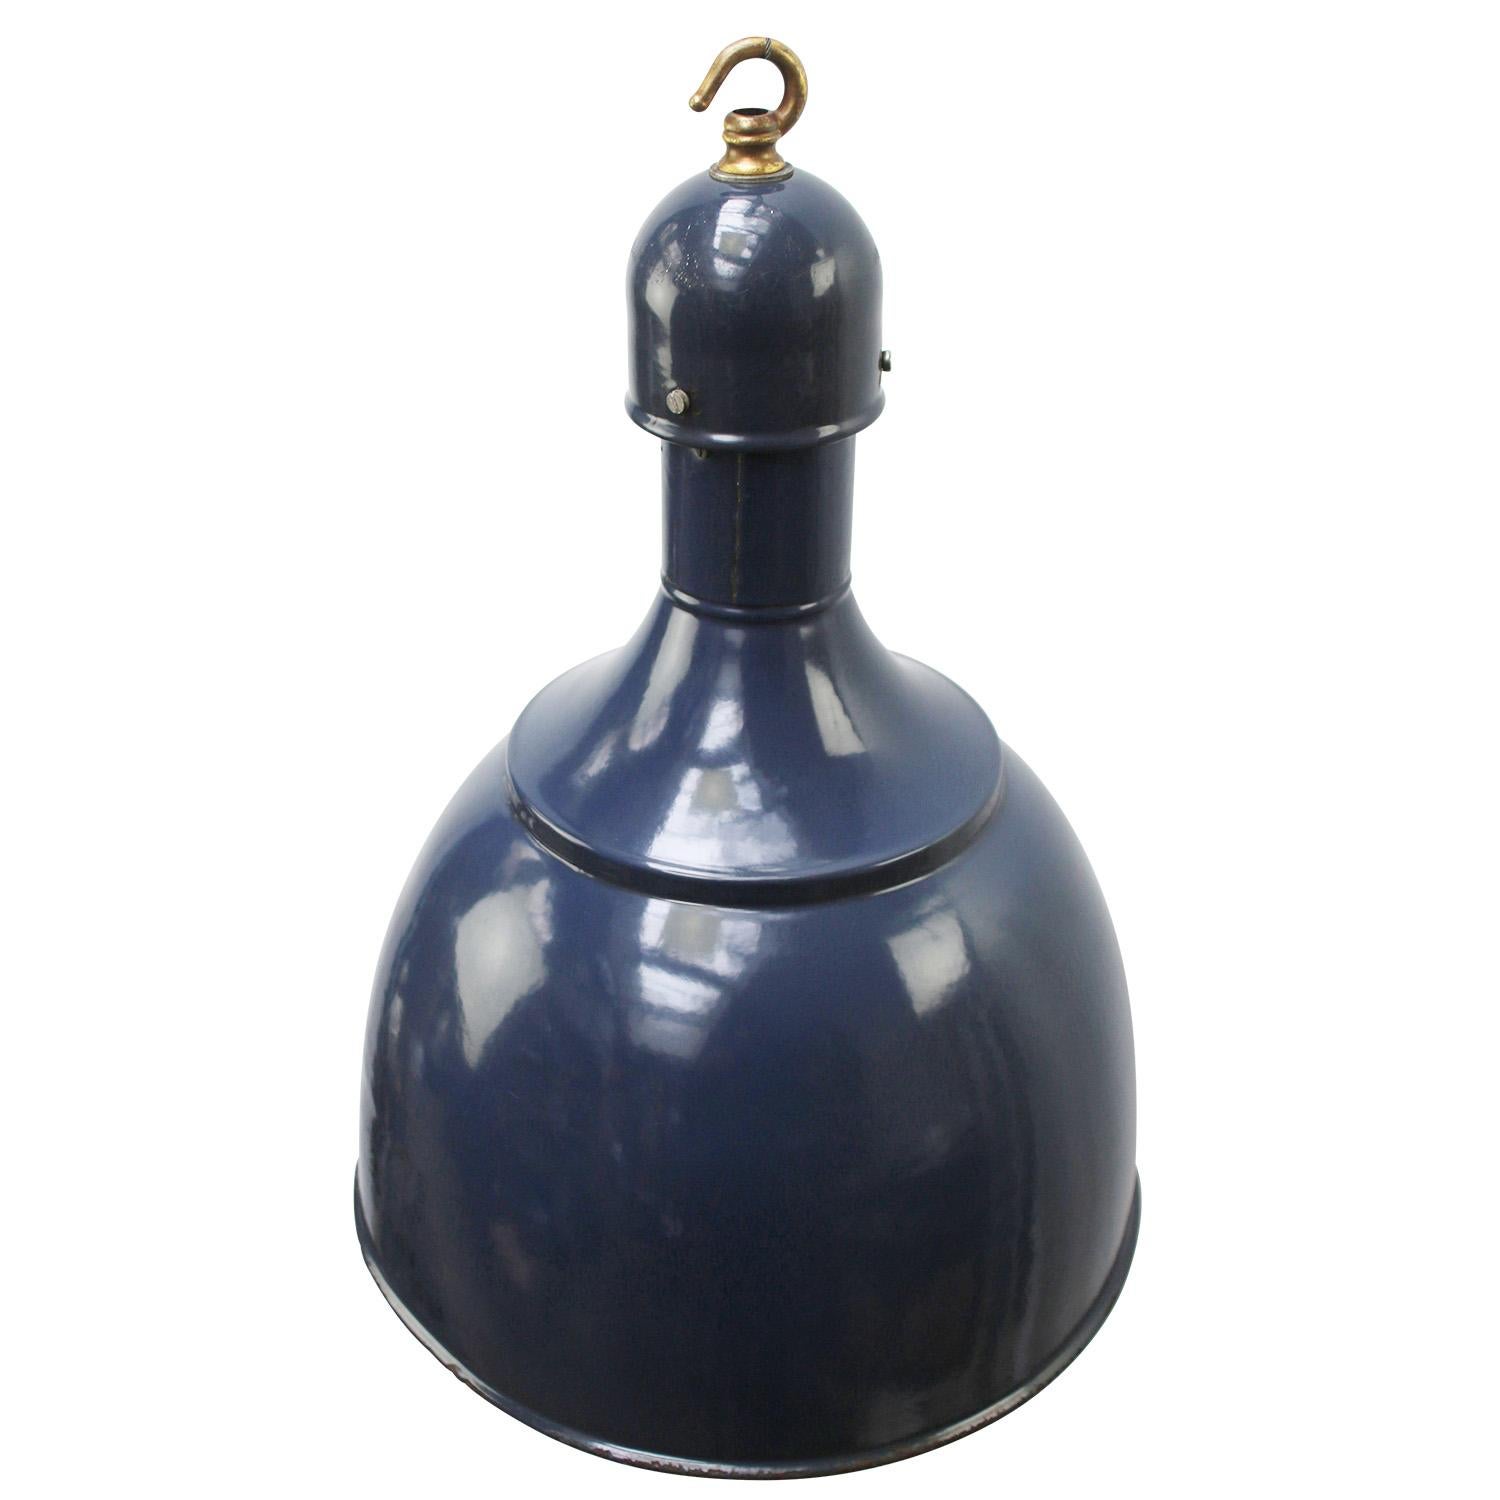 Large factory pendant, blue enamel
White interior, brass top

Weight: 2.5 kg / 5.5 lb

Priced per individual item. All lamps have been made suitable by international standards for incandescent light bulbs, energy-efficient and LED bulbs. E26/E27